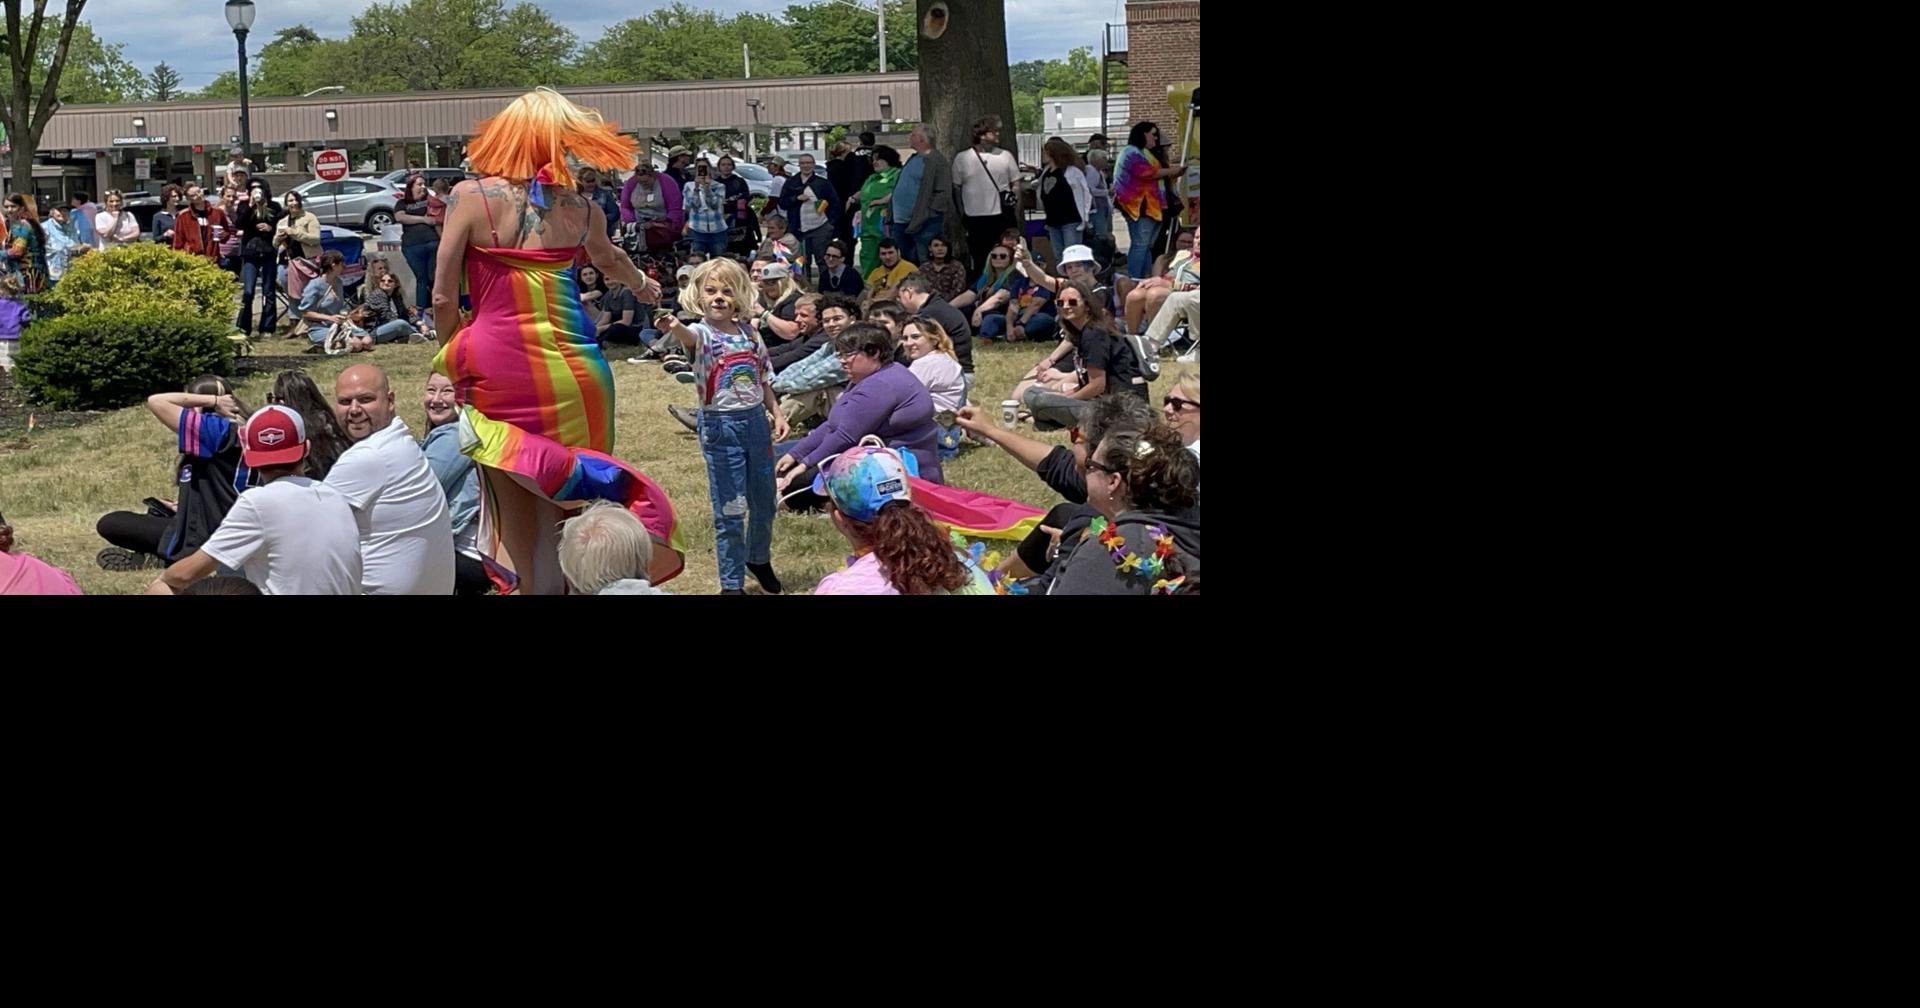 Glens Falls Pride celebrated with drag show, march and more